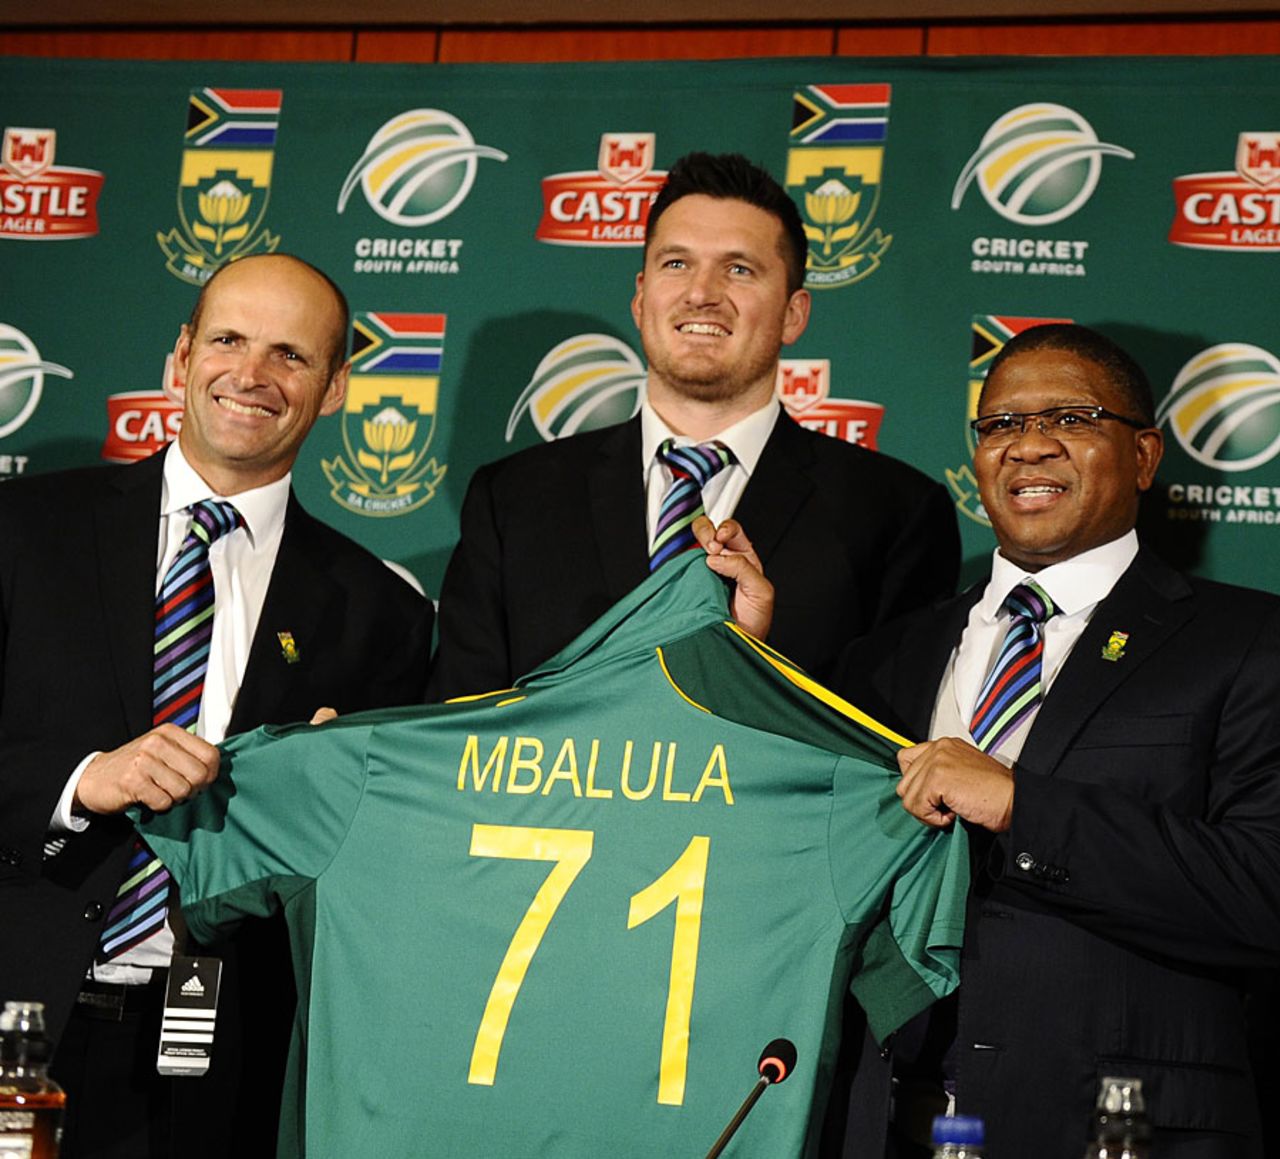 Gary Kirsten, Graeme Smith and Minister of Sport Fikile Mbalula at South Africa's departure press conference, Johannesburg, July 2, 2012